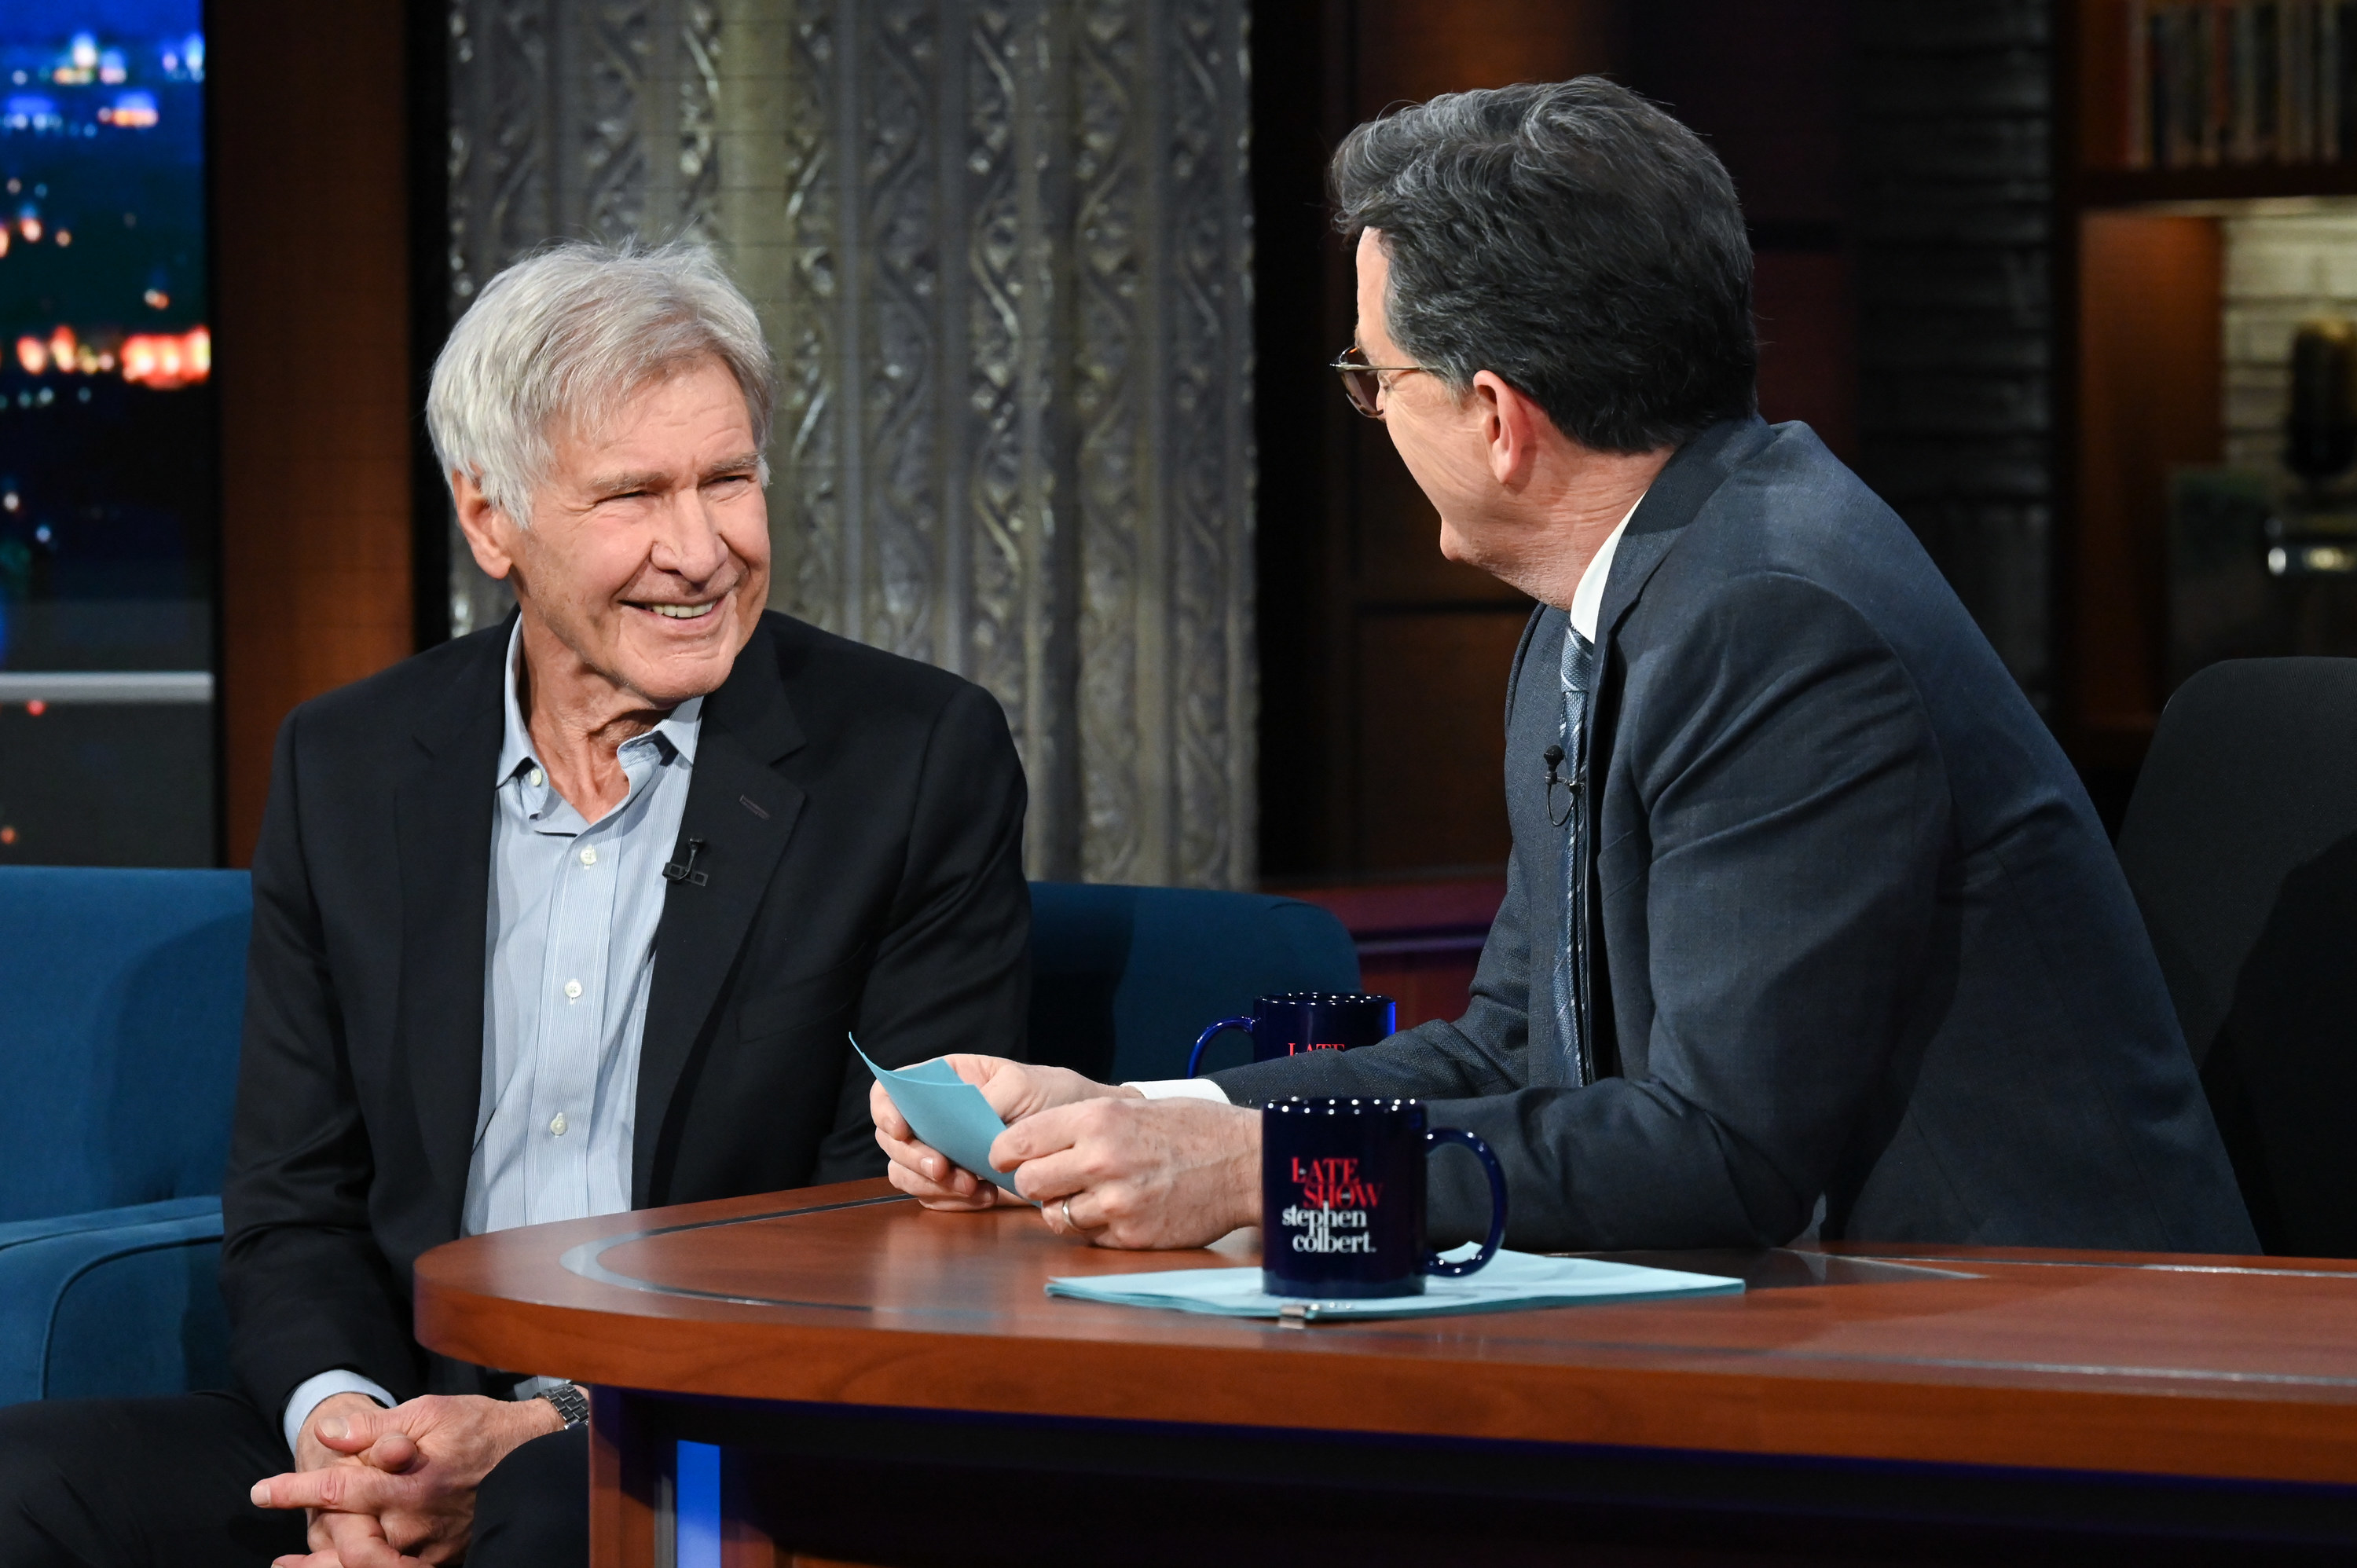 The Late Show with Stephen Colbert and guest Harrison Ford during Wednesdays February 1, 2023 show